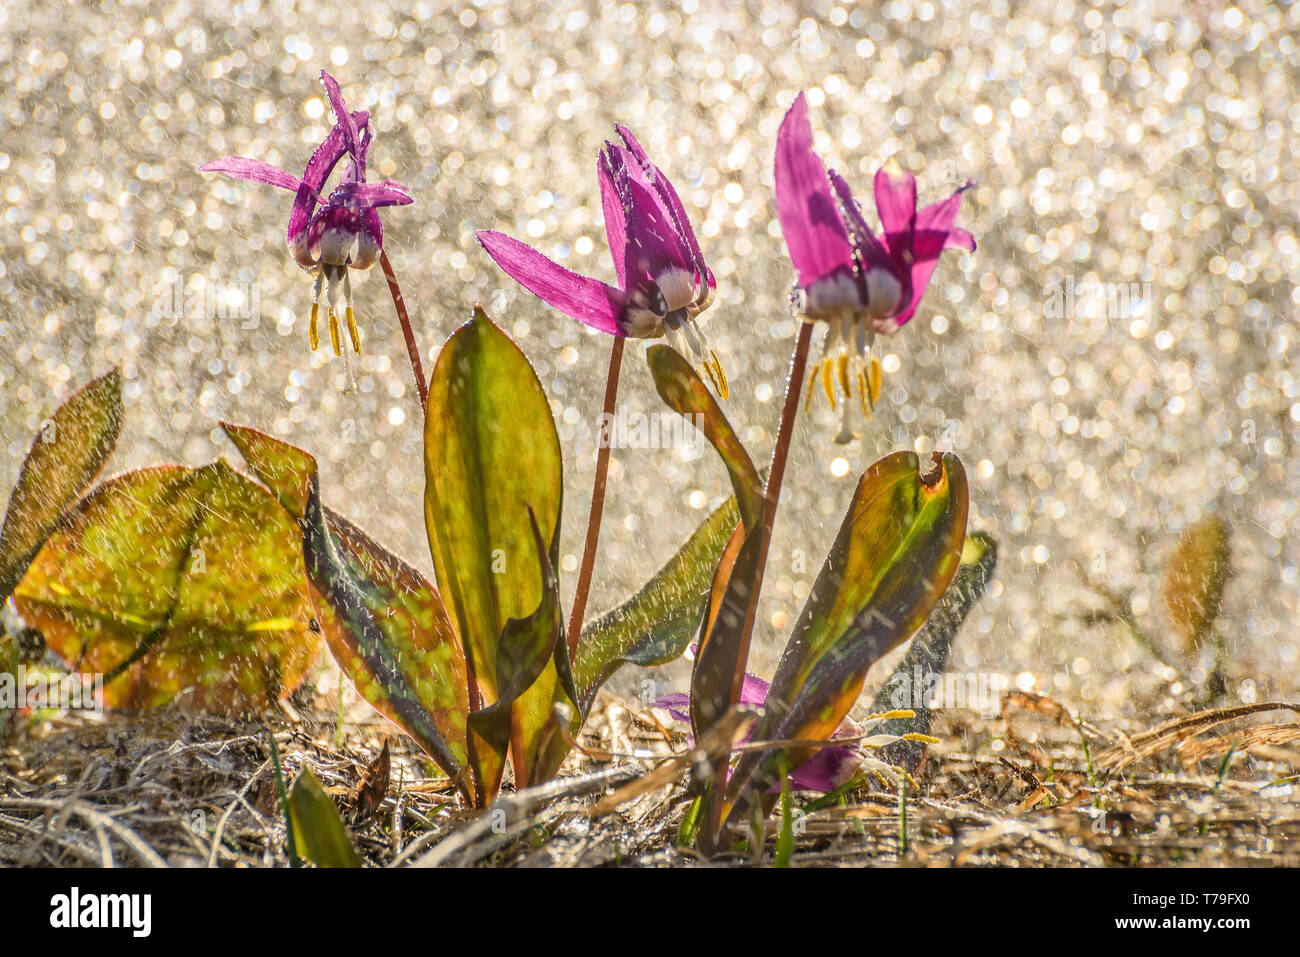 Amazing first spring burgundy wild flowers of Erythronium sibiricum with drops and traces of rain in the meadow close-up with sun glare Stock Photo